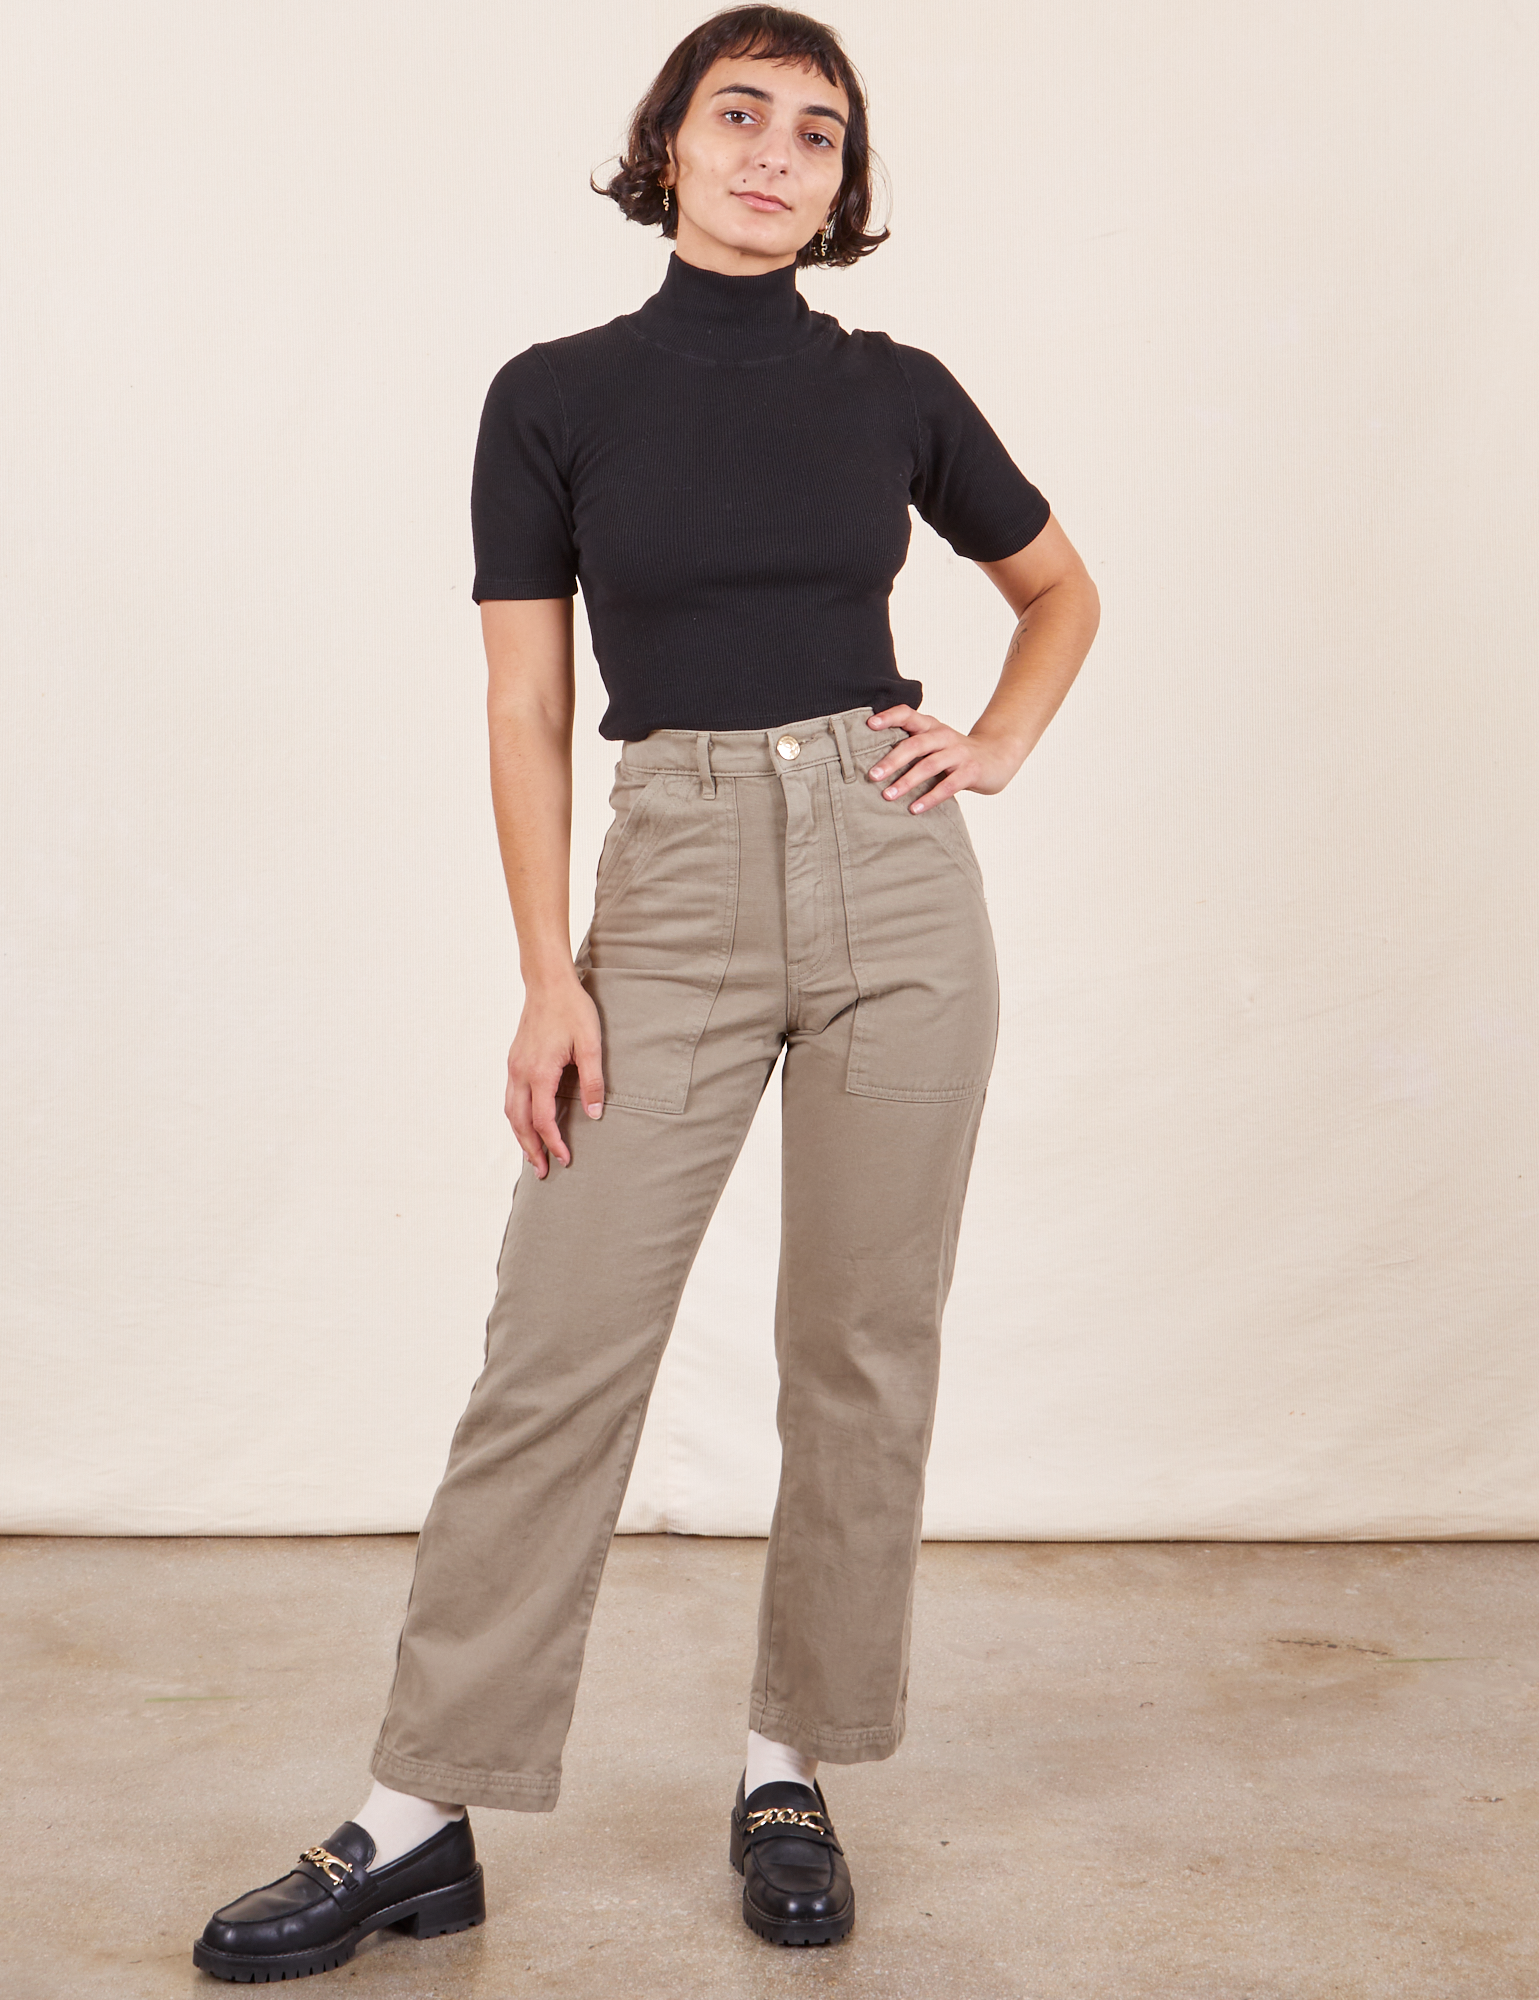 Soraya is 5&#39;2&quot; and wearing Petite XXS Work Pants in Khaki Grey paired with 1/2 Sleeve Turtleneck in black